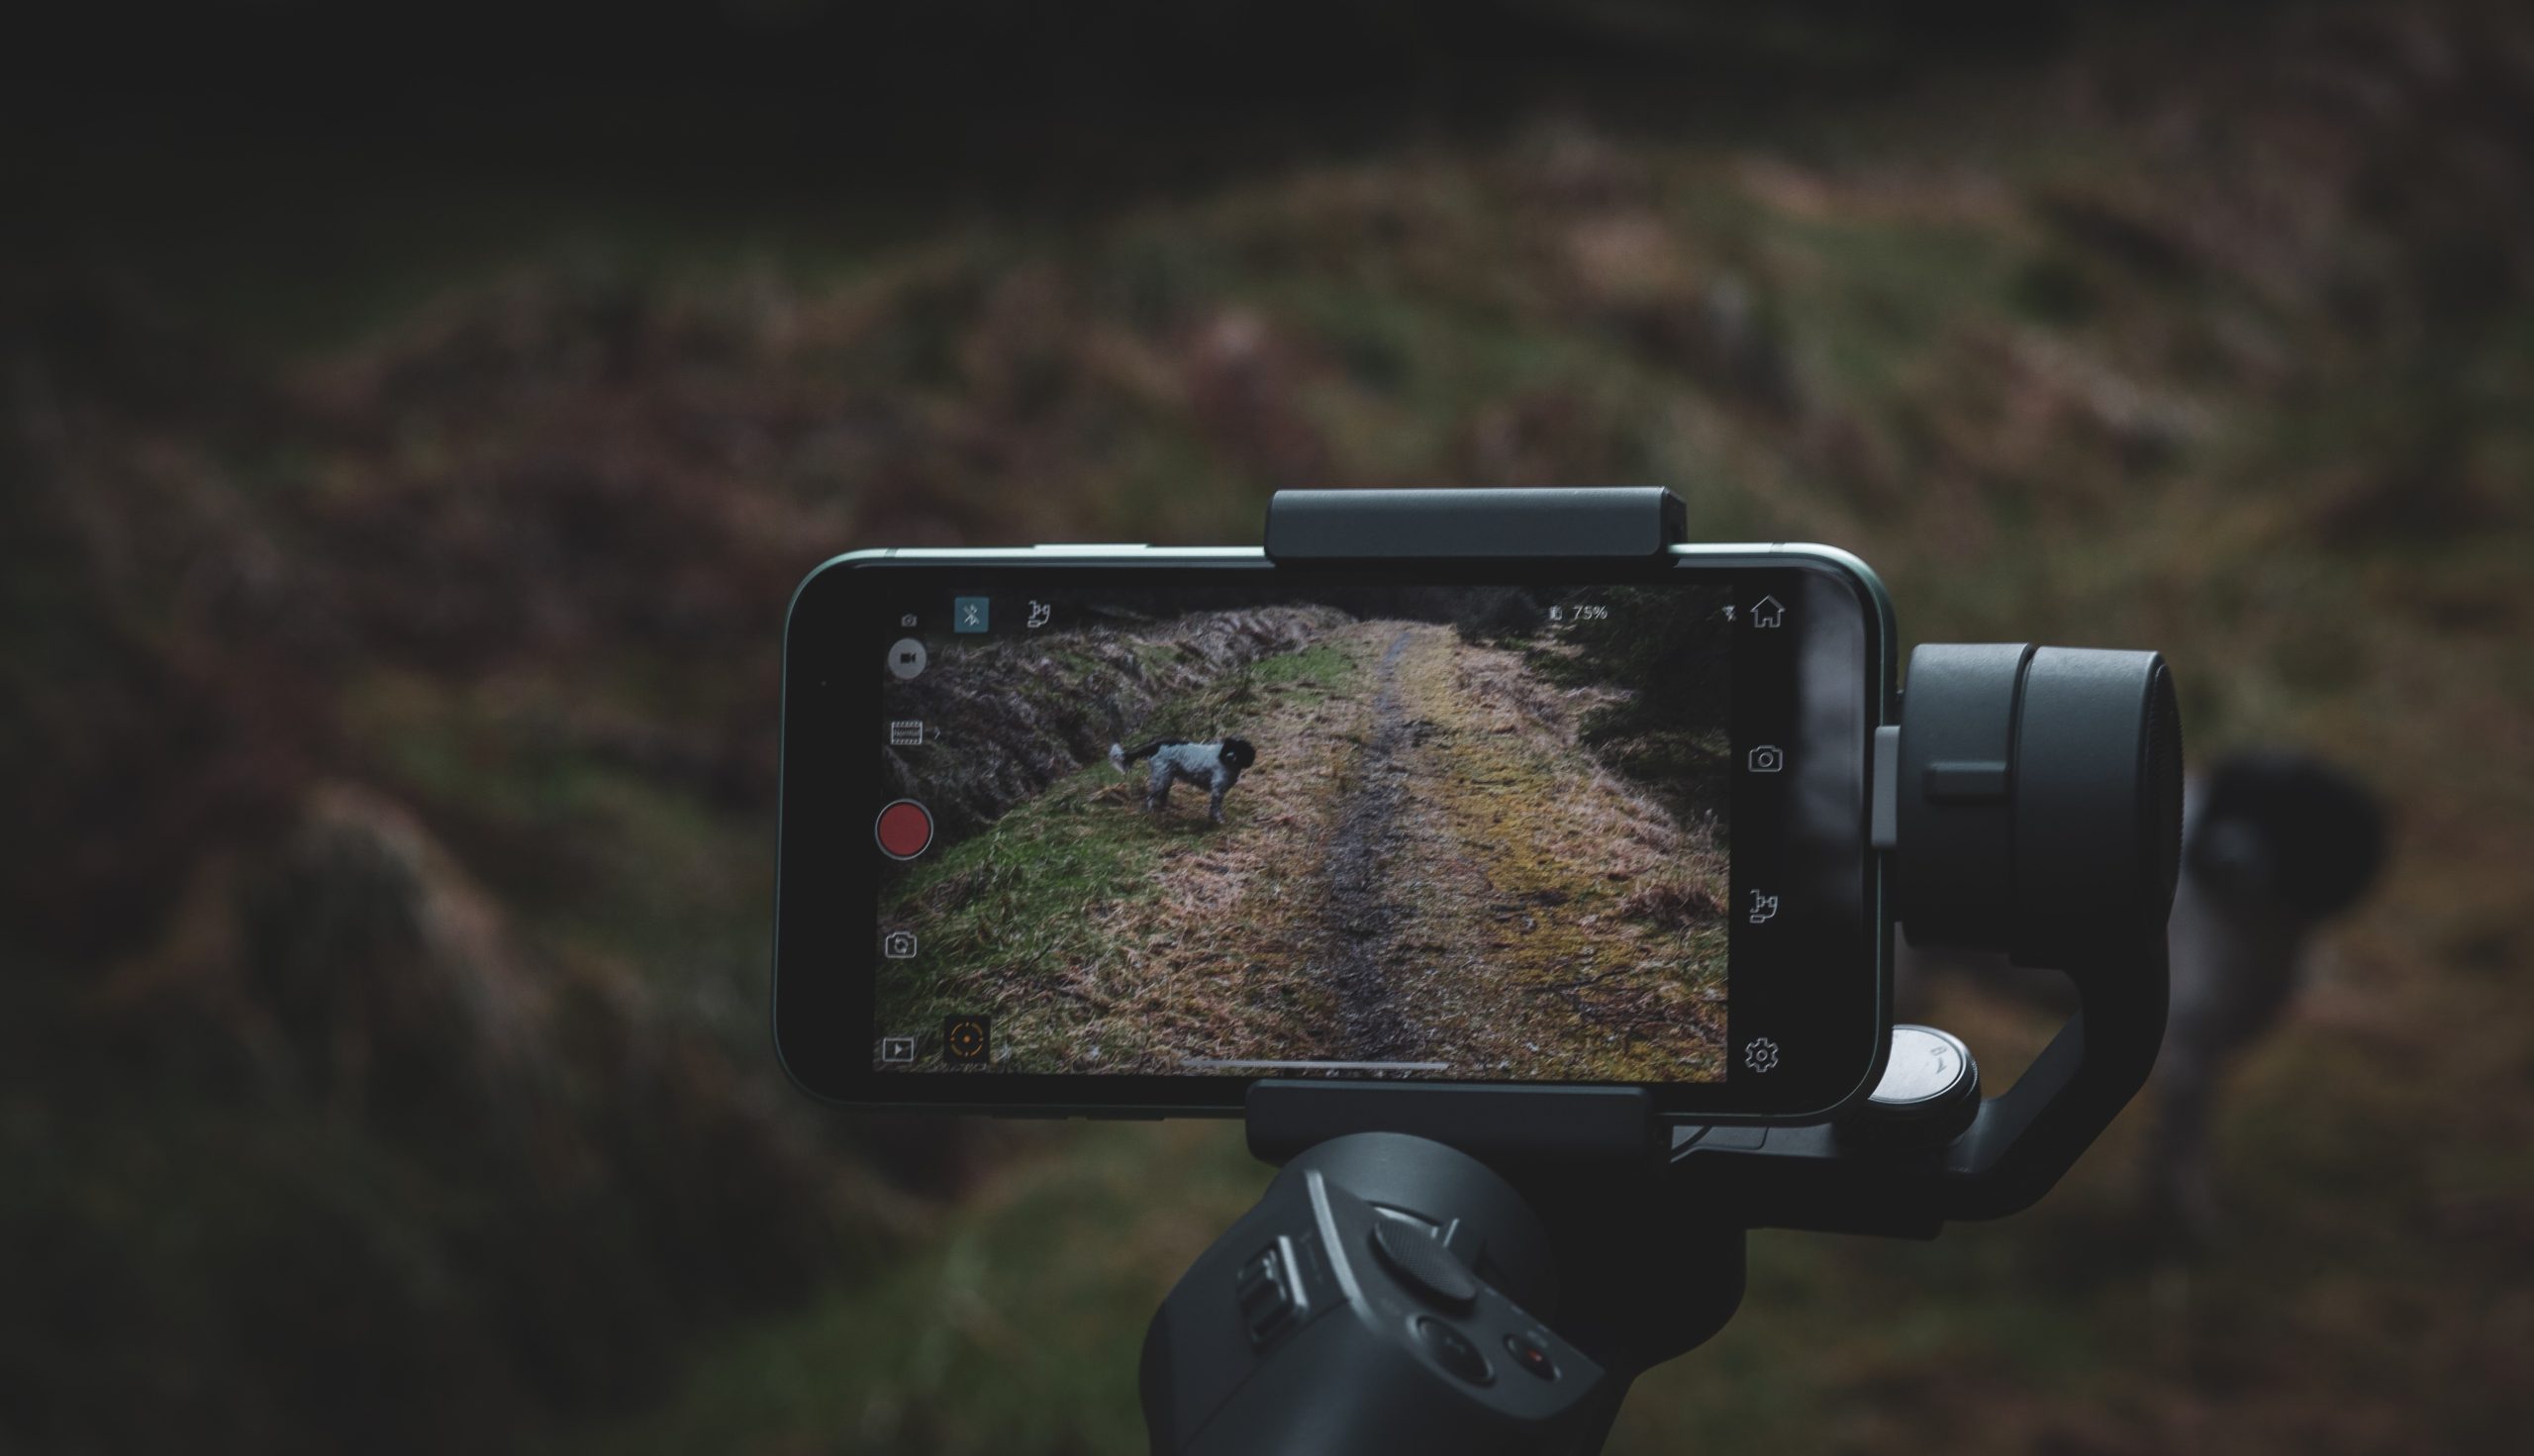 Smartphone attached to a gimbal recording a video featuring a dog.